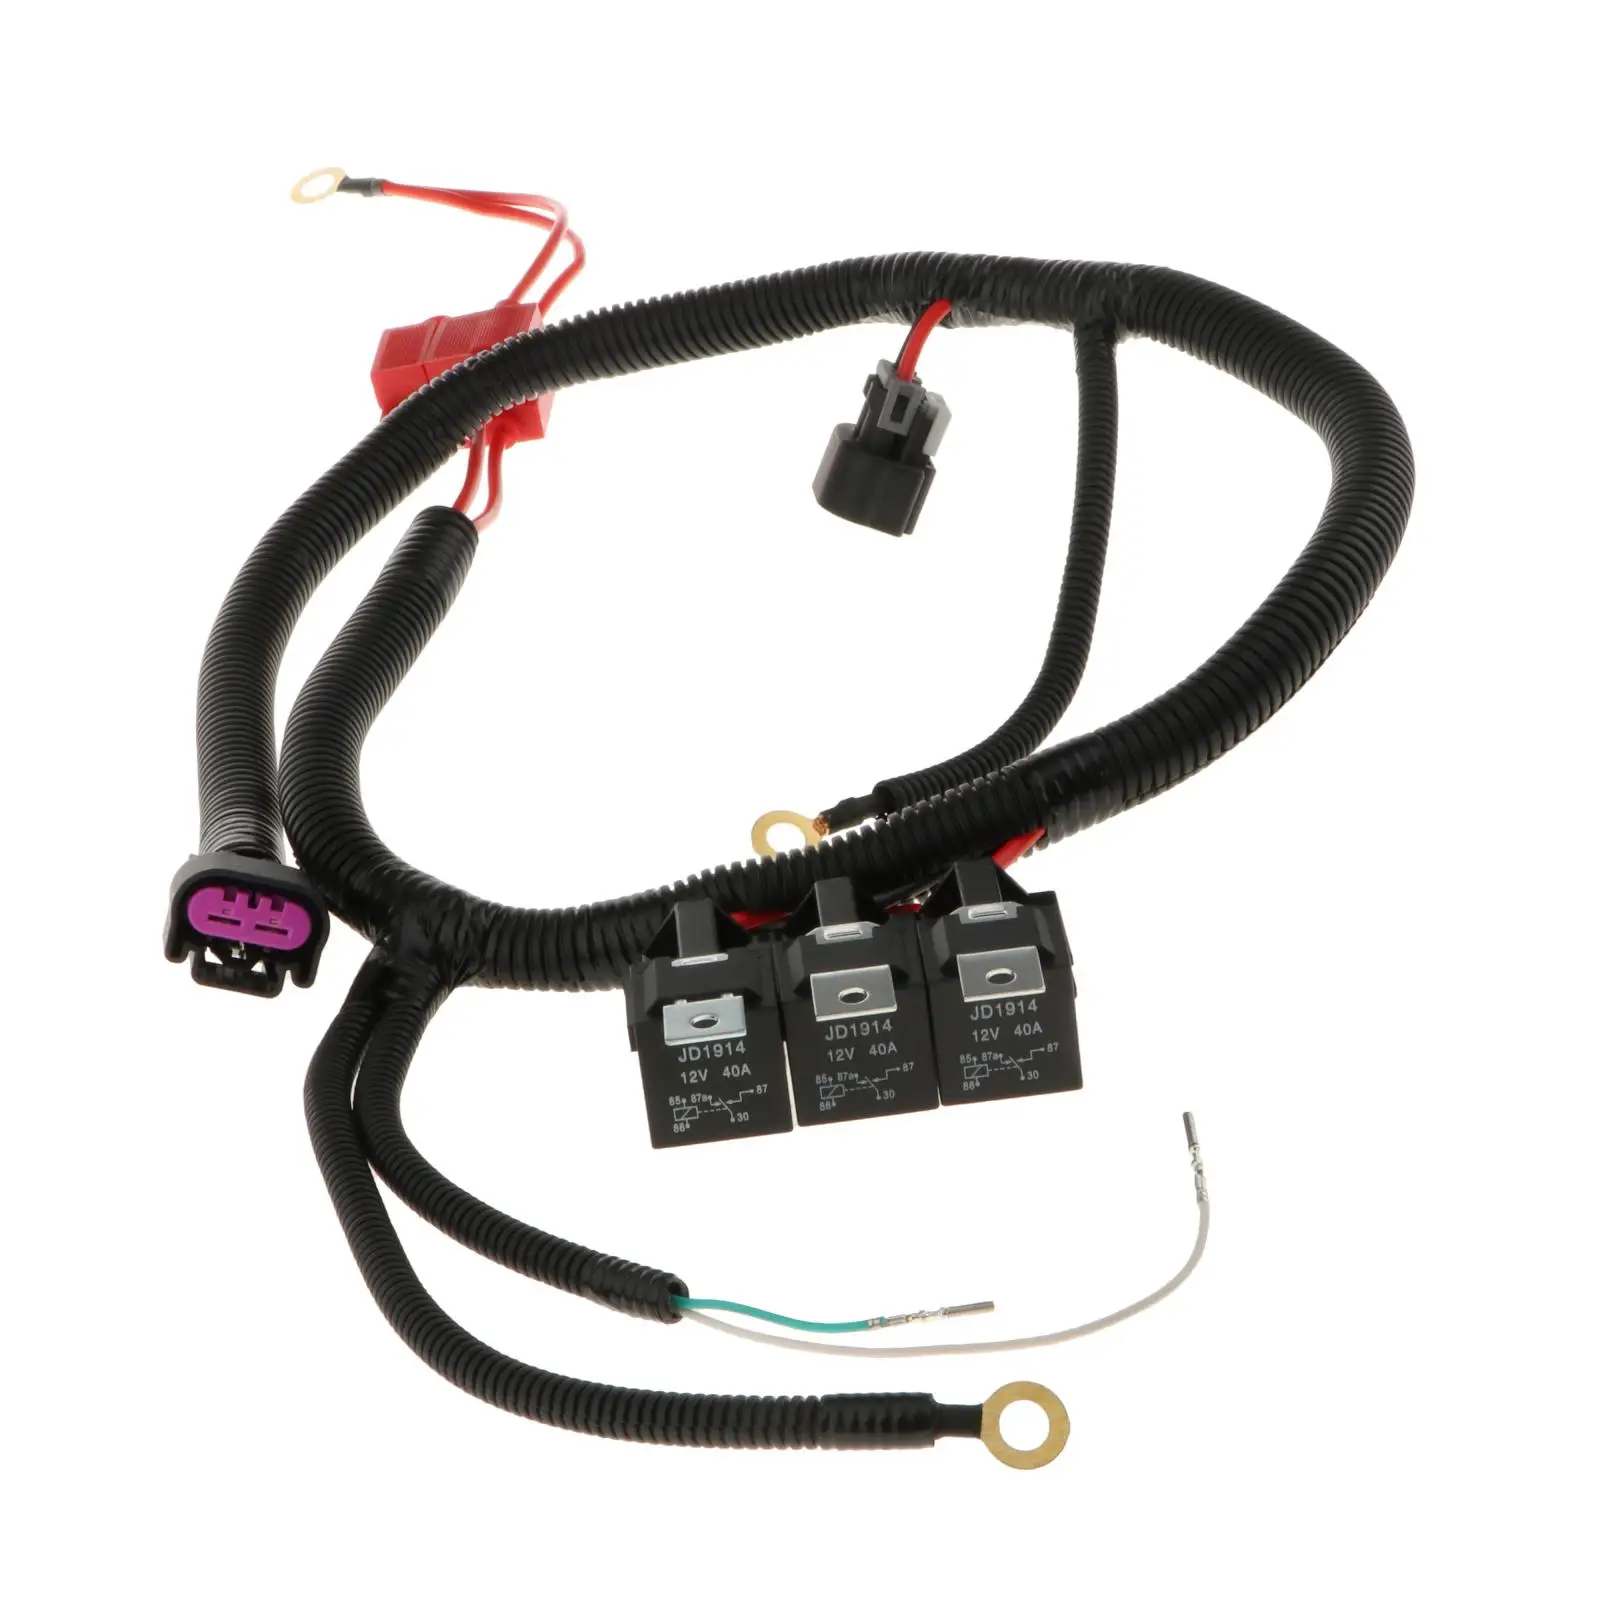 200mm Practical Electric Cooling Fan Wire Harness Kit, Dual Electric Fan Upgrade Wiring Harness